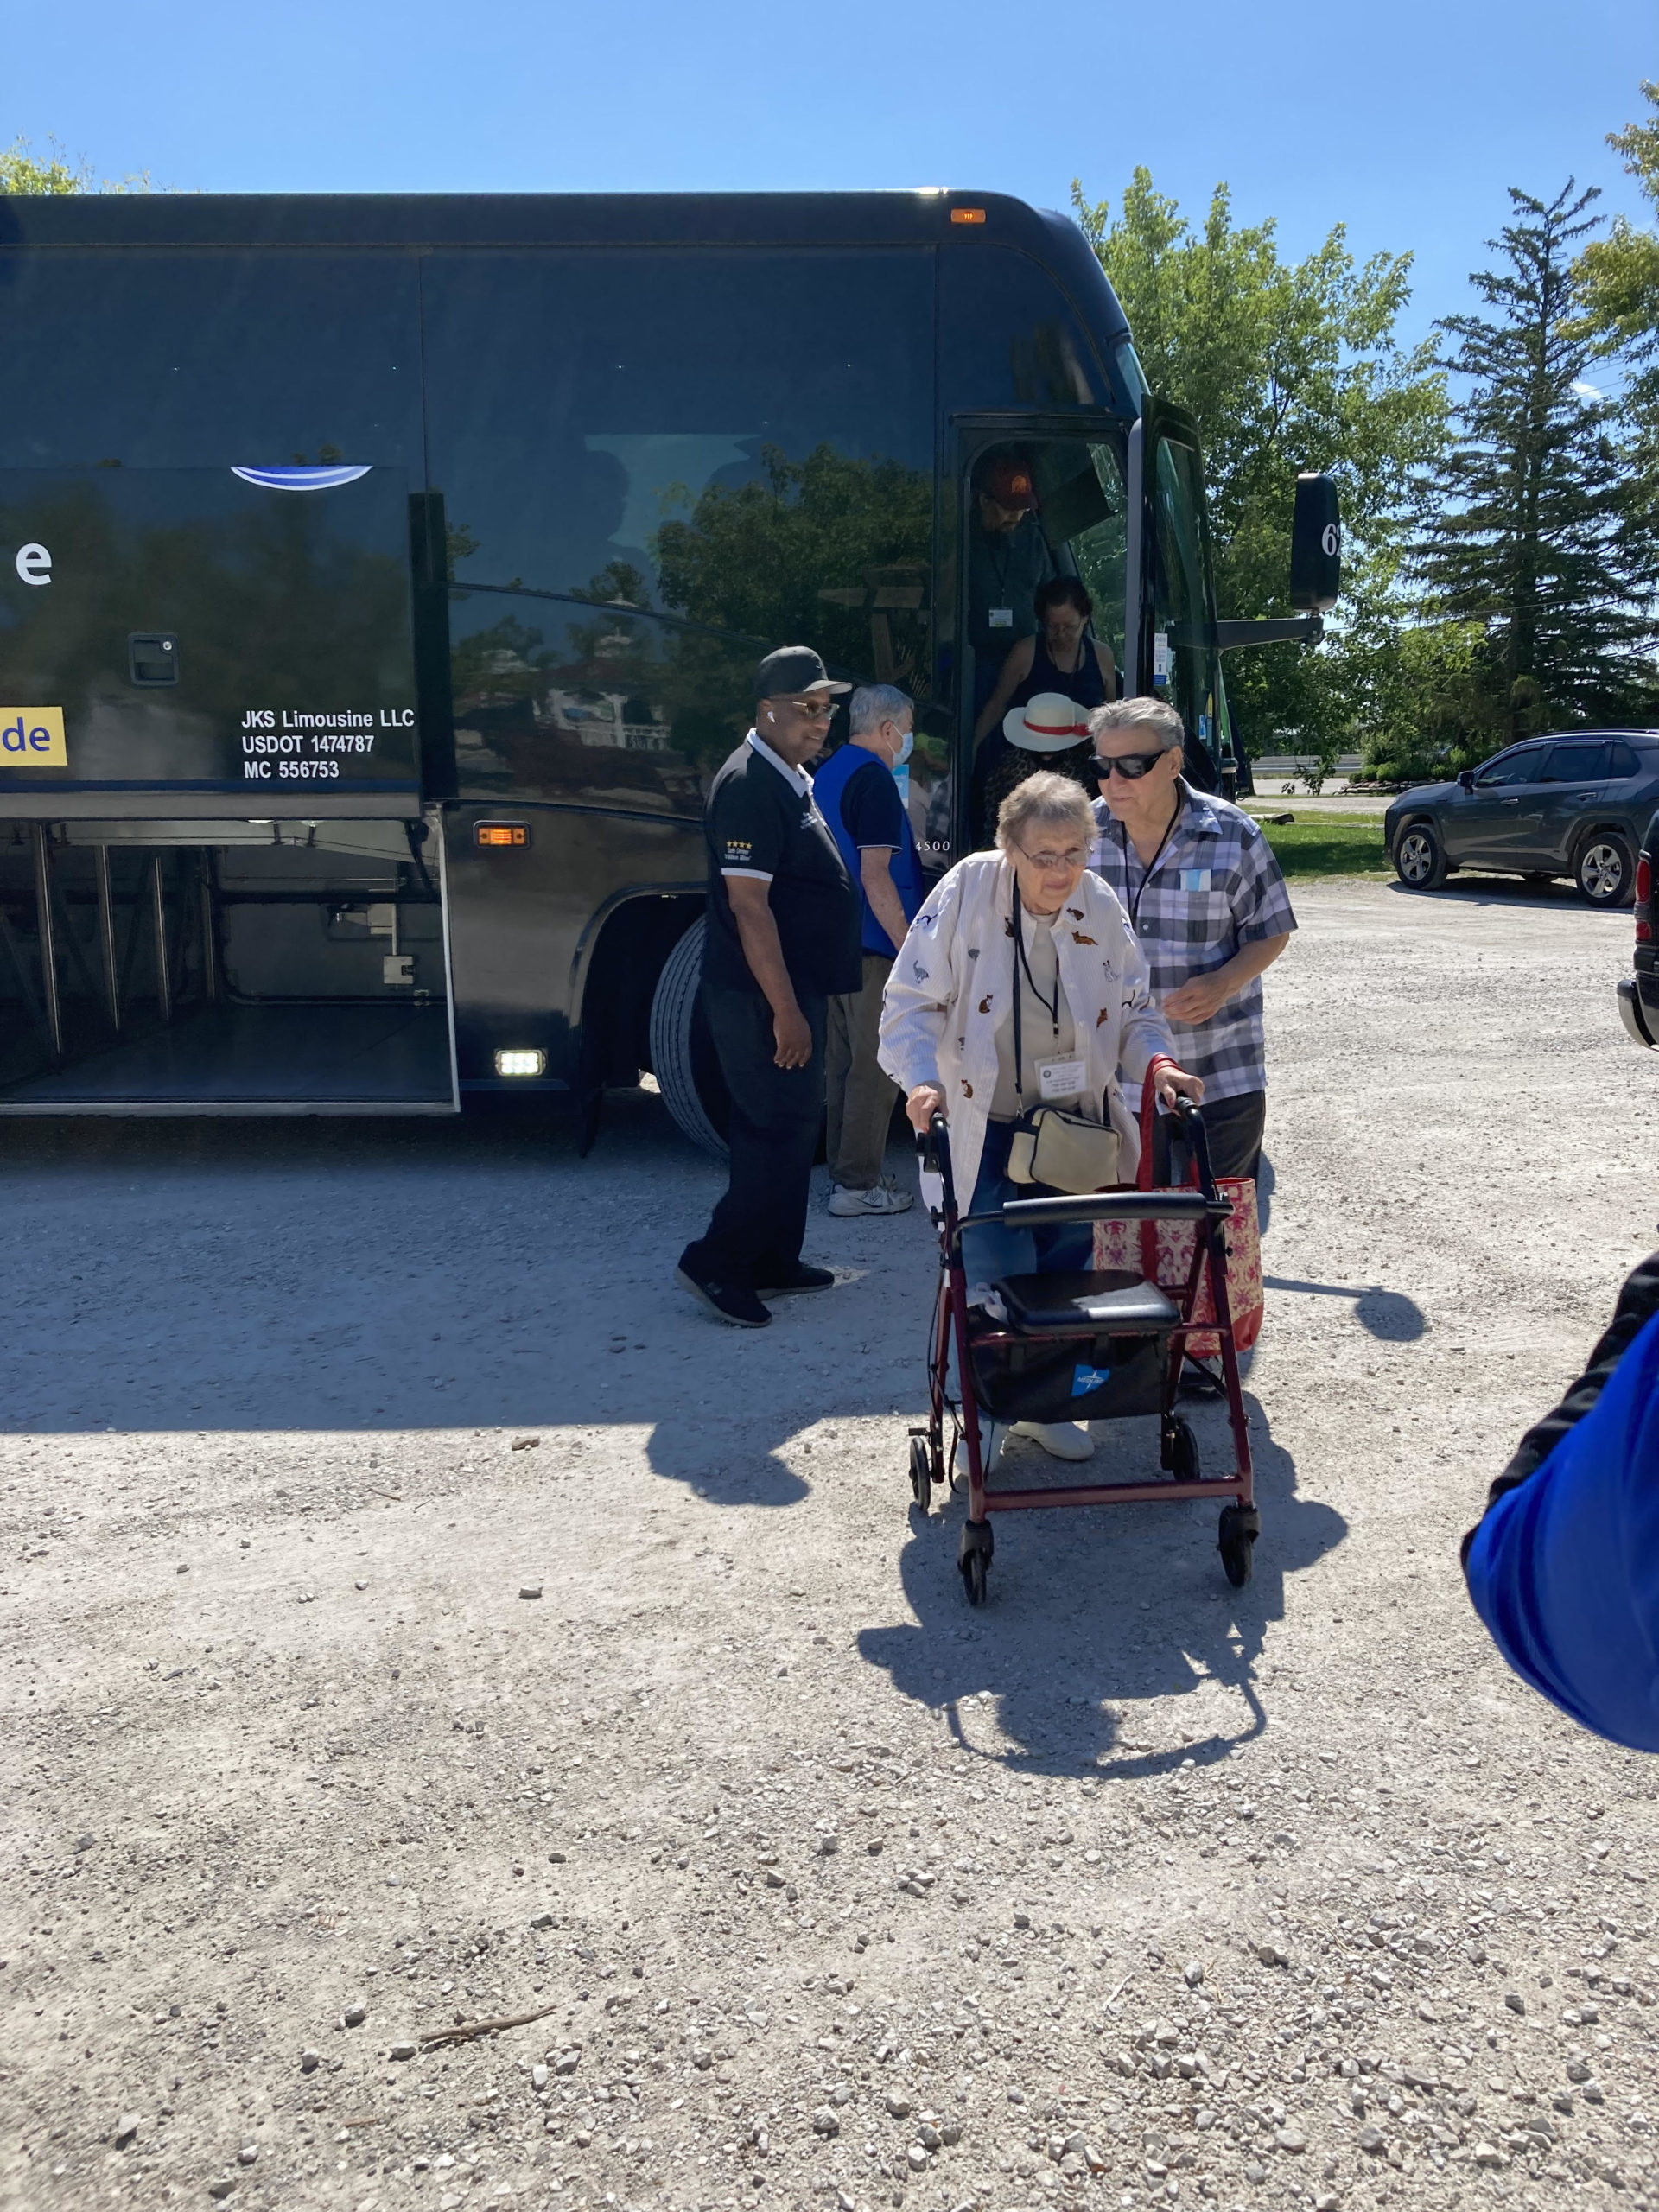 The Cicero Senior Center organized a tour of the Apple Holler Farm in Wisconsin recently to allow seniors and members of the Center to enjoy a day-long visit and the launch of the farm’s annual “Peach Picking” season.